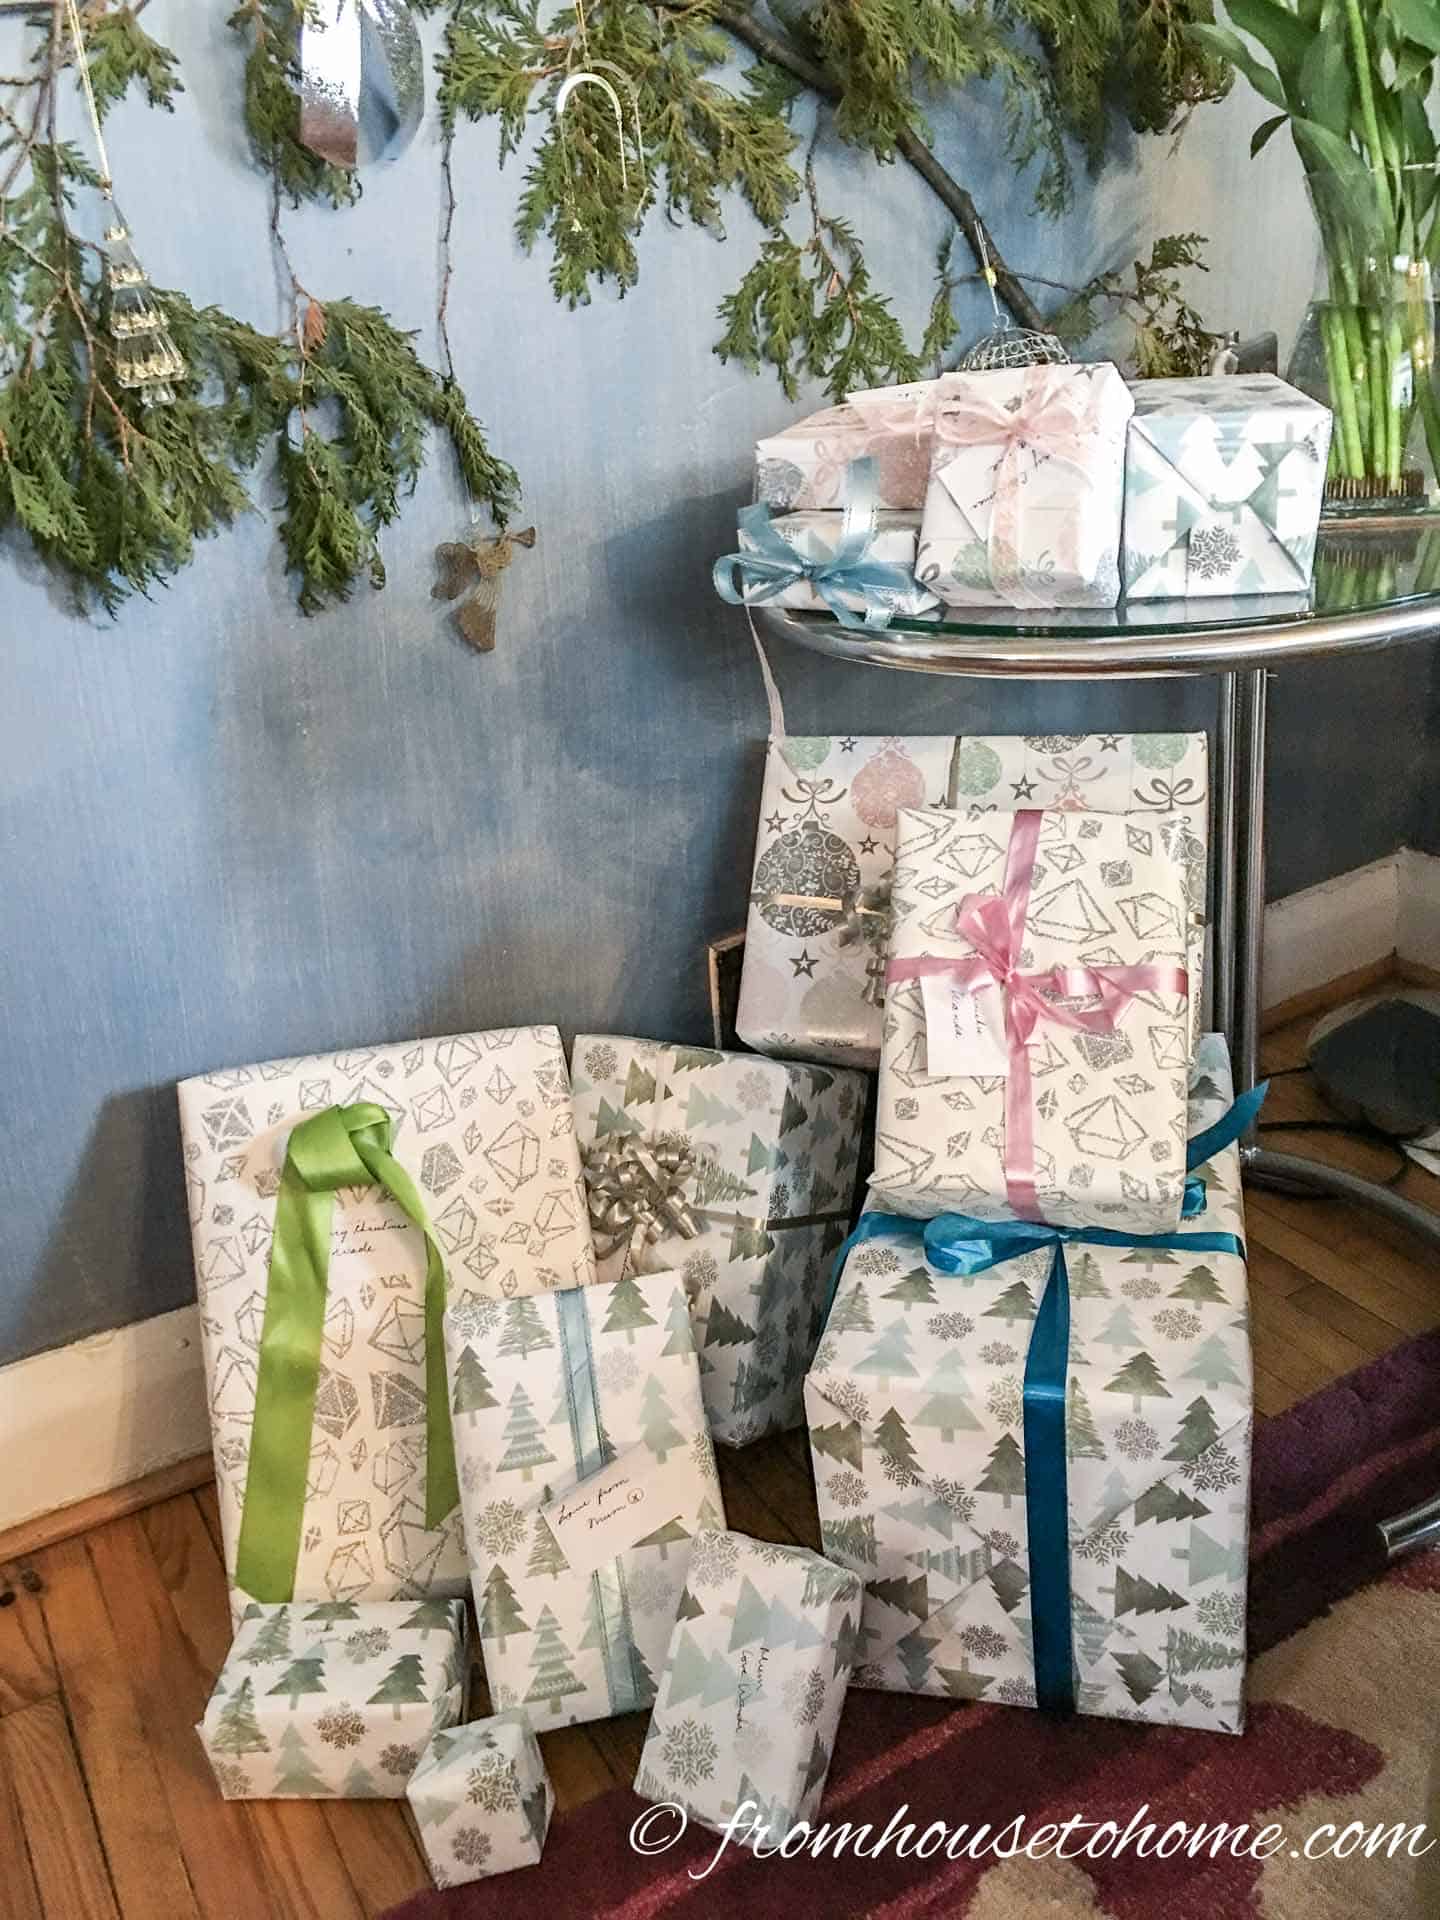 Christmas presents wrapped in coordinating paper used as Christmas home decorations